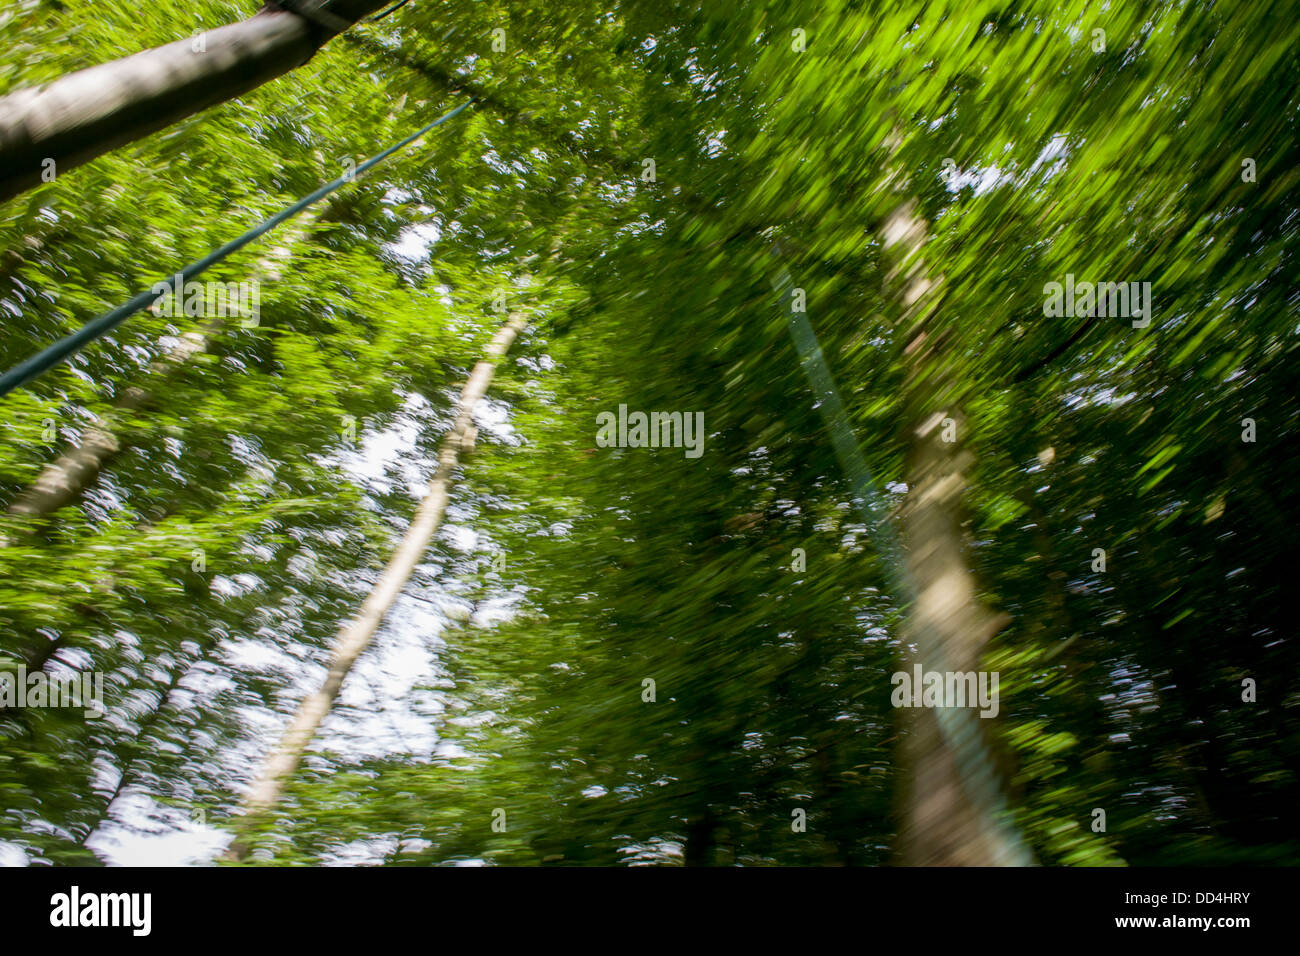 Blurred vegetation of beech trees during a daydream moment in a Somerset forest. Stock Photo